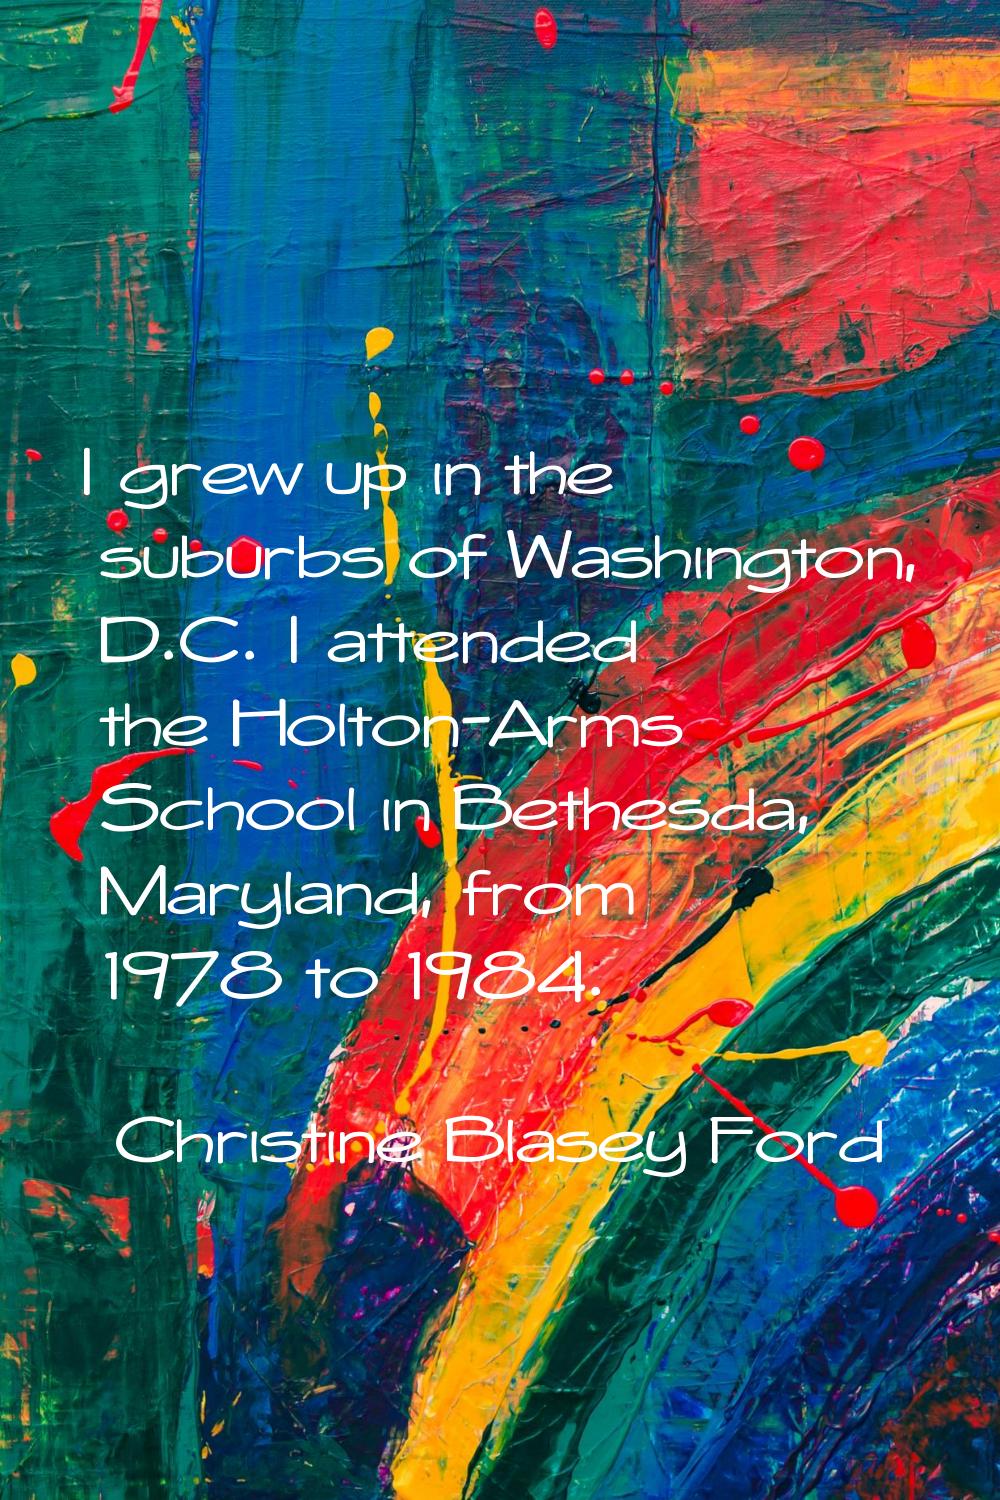 I grew up in the suburbs of Washington, D.C. I attended the Holton-Arms School in Bethesda, Marylan